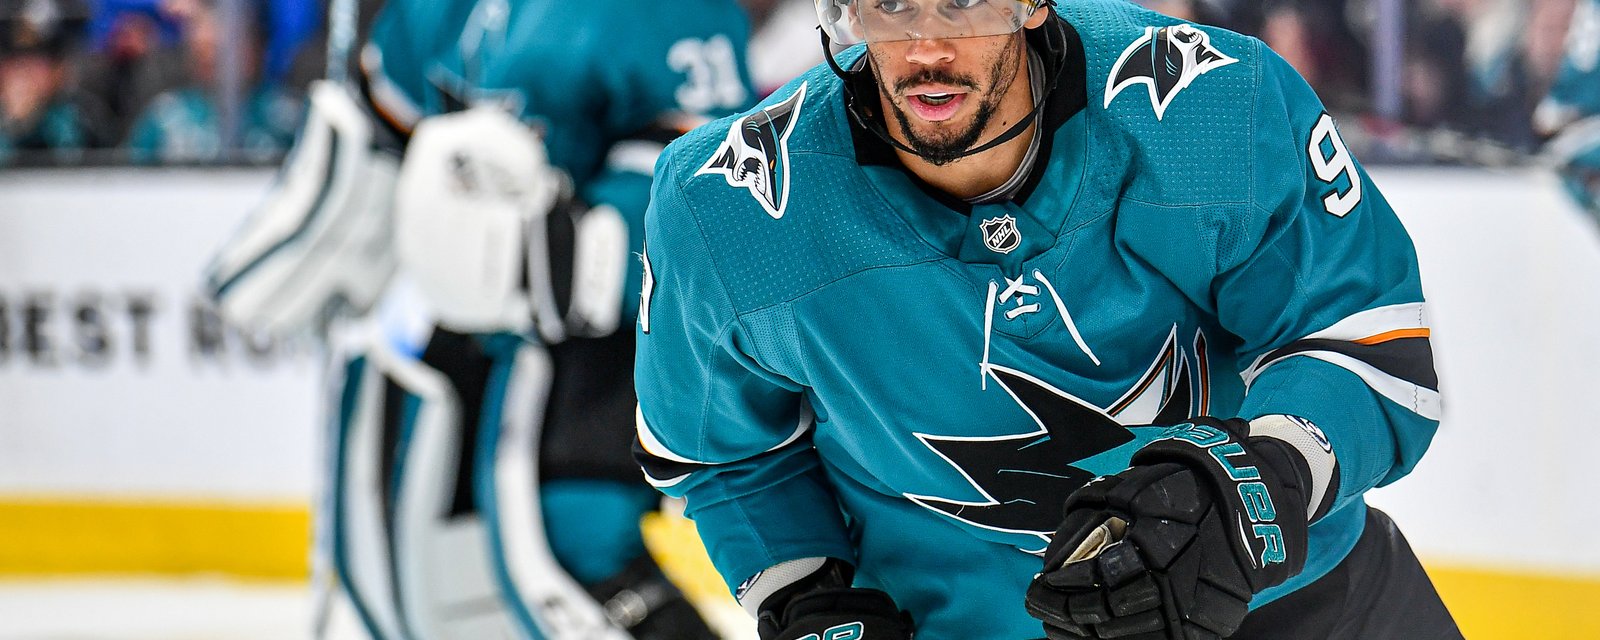 The NHL may not be done with Evander Kane